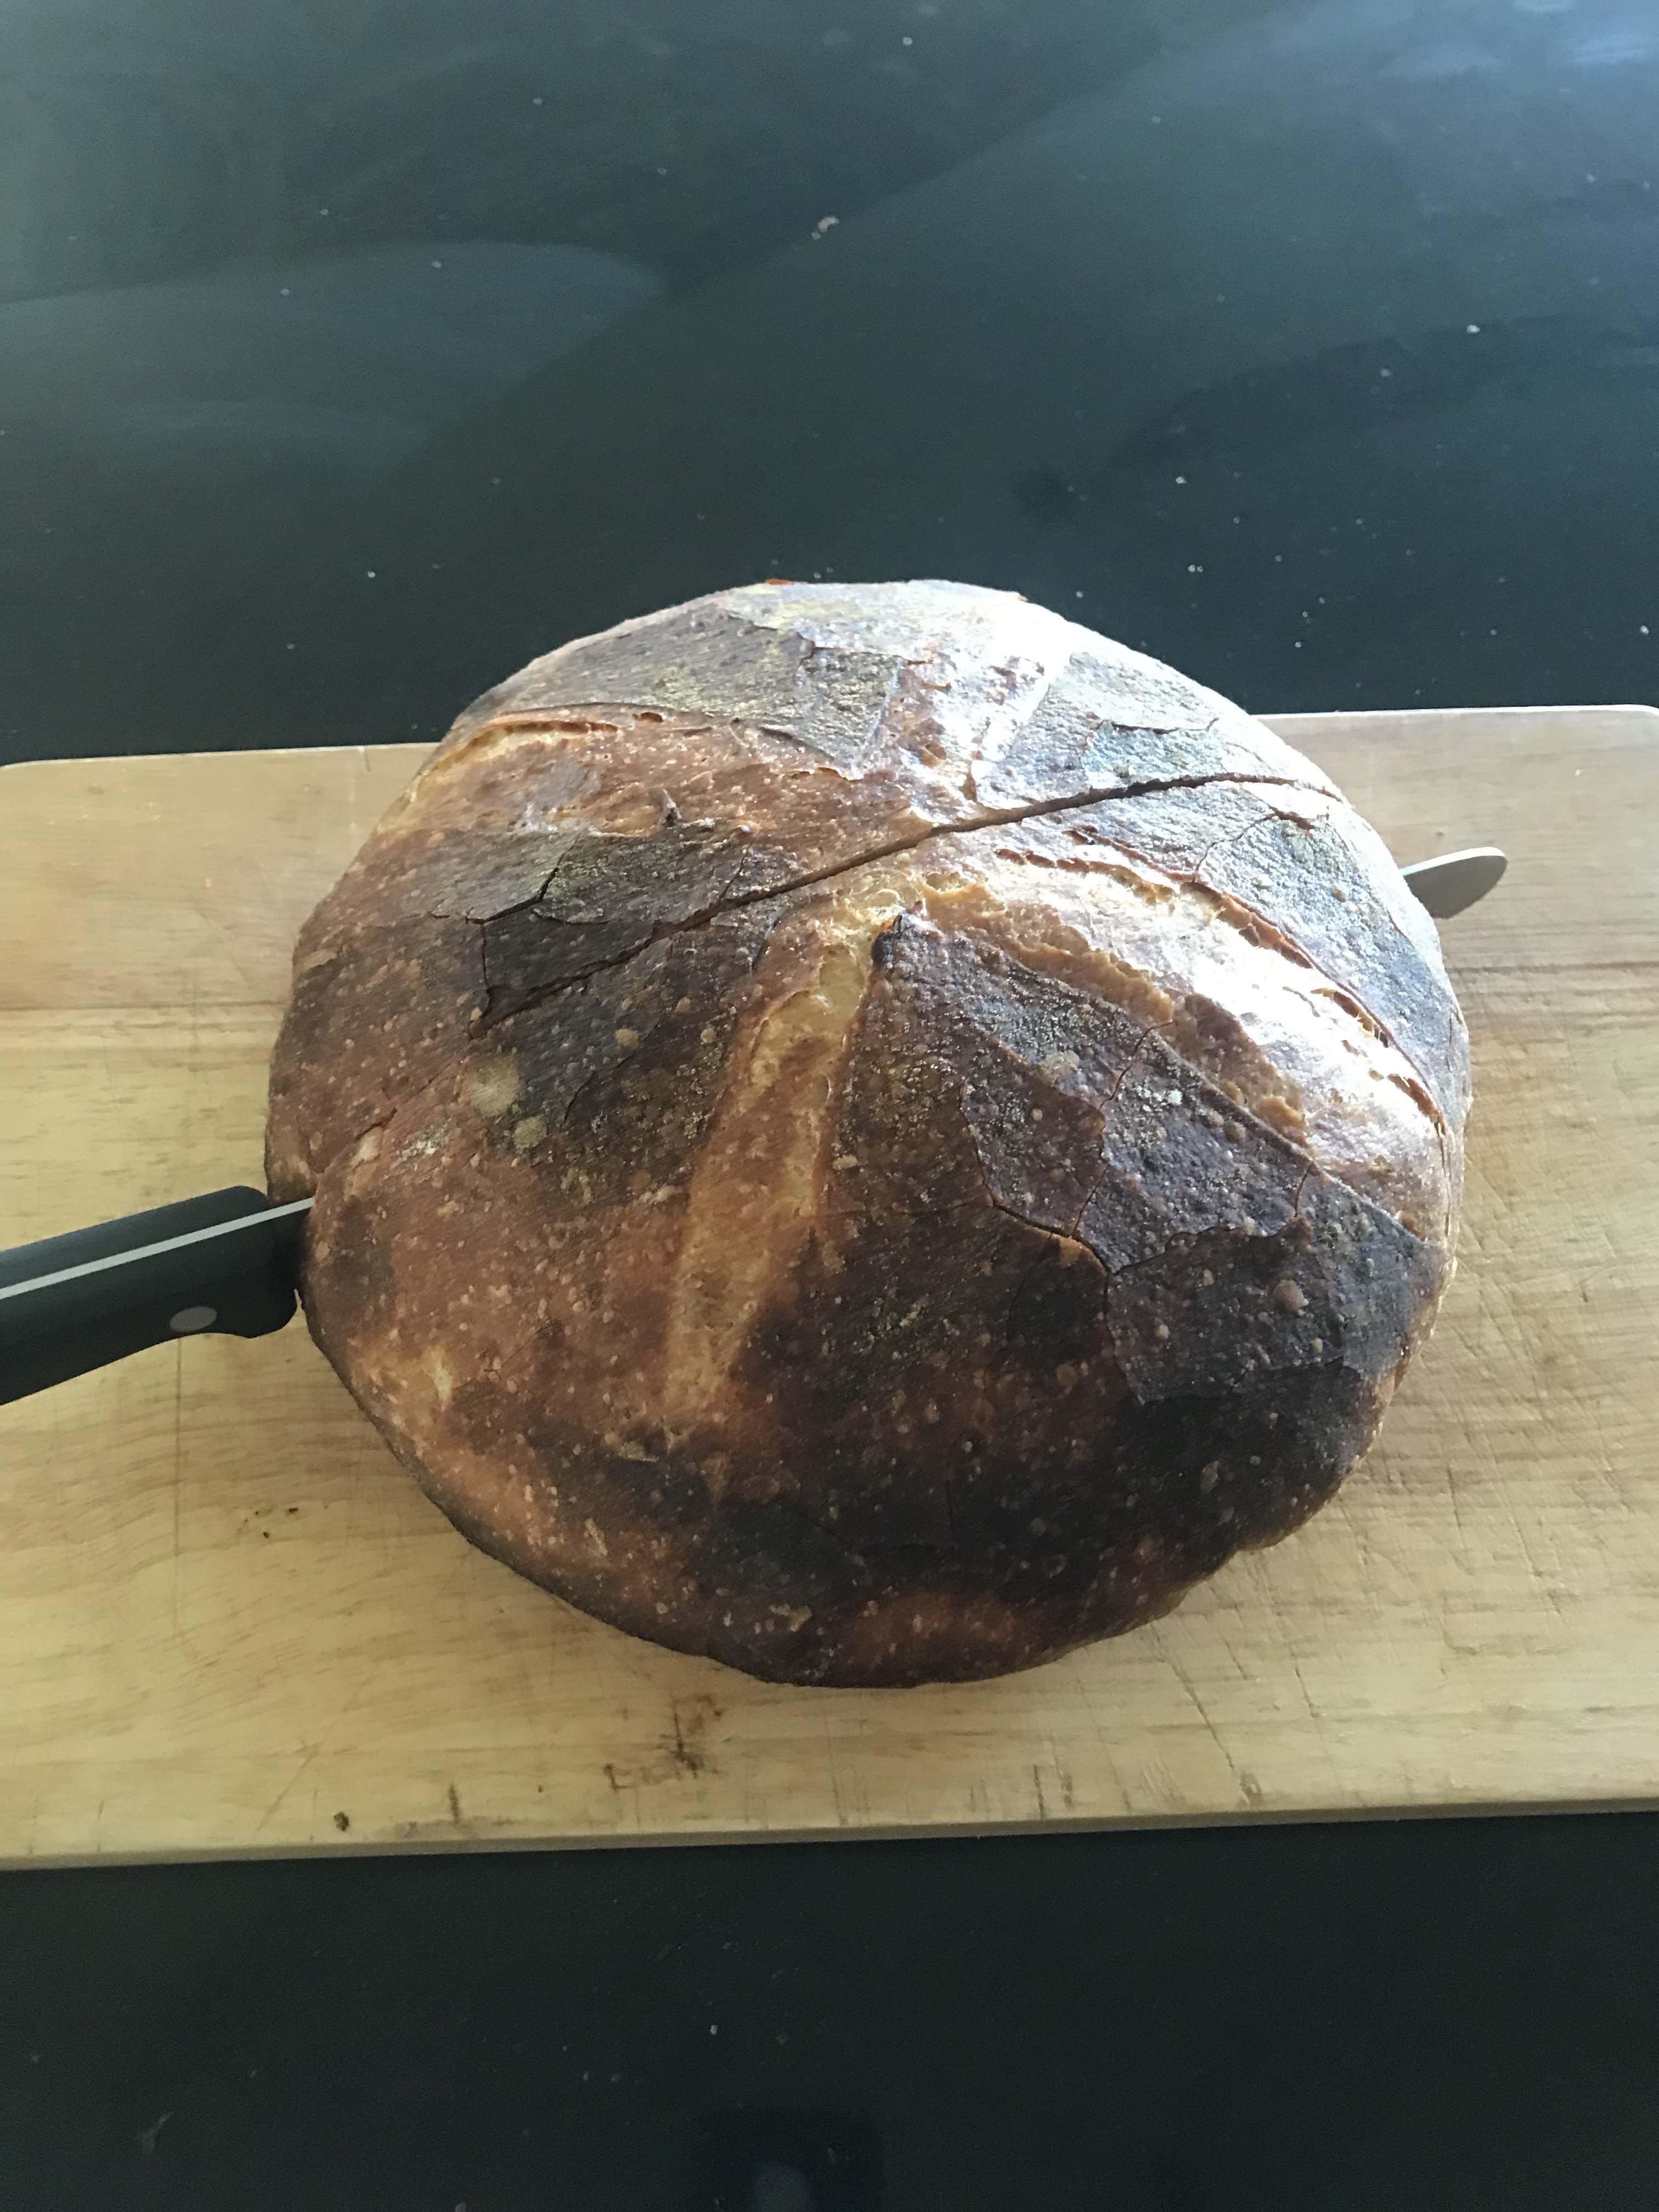 Bread with a knife in it, from above